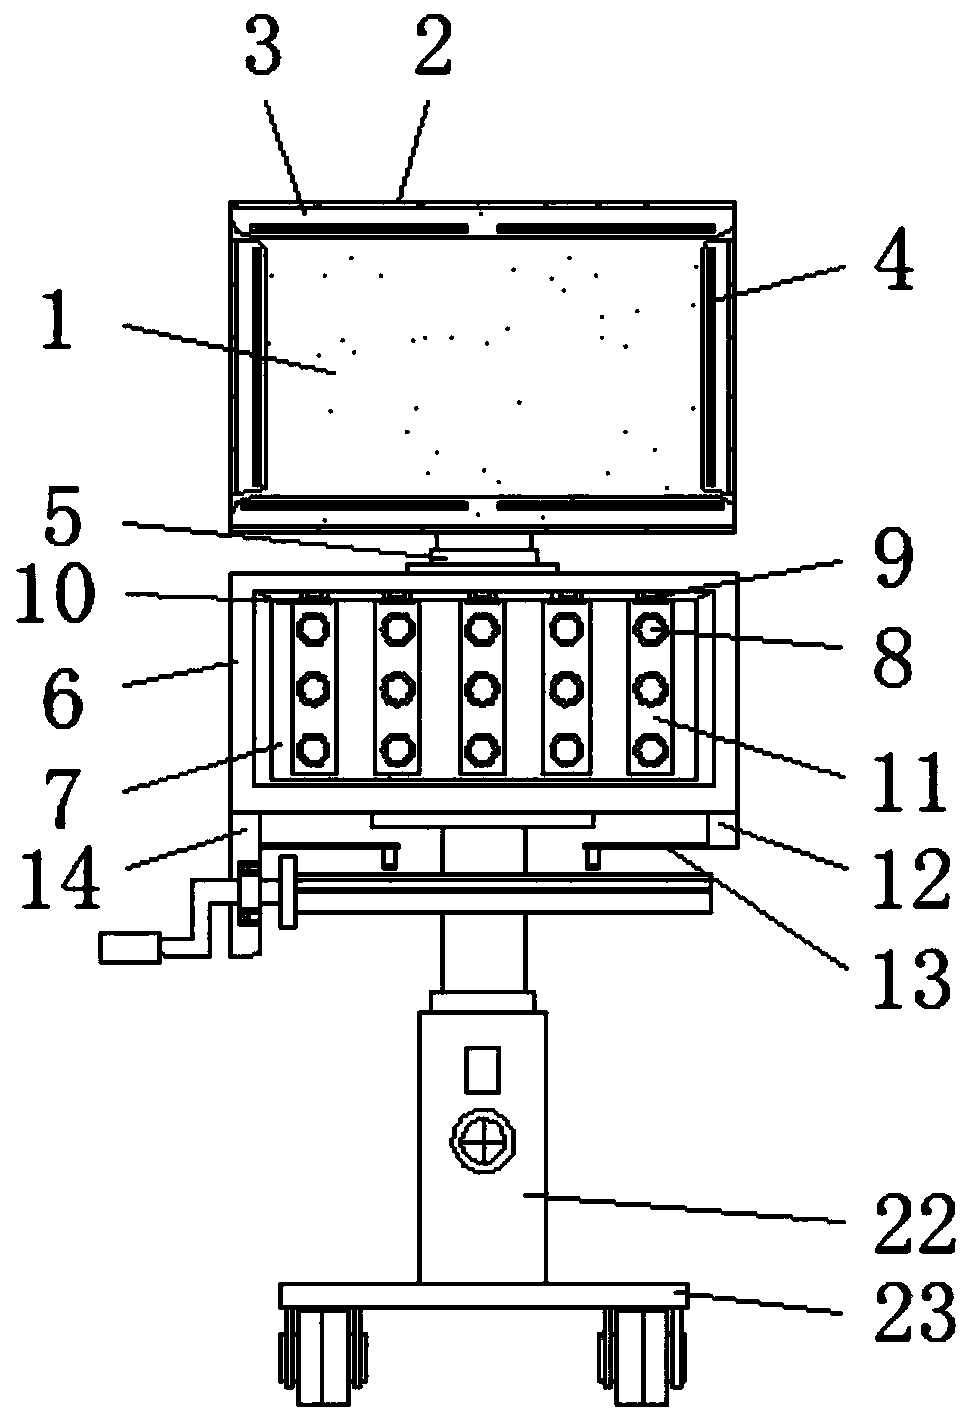 Display and storage device with rolling function for architectural drawing